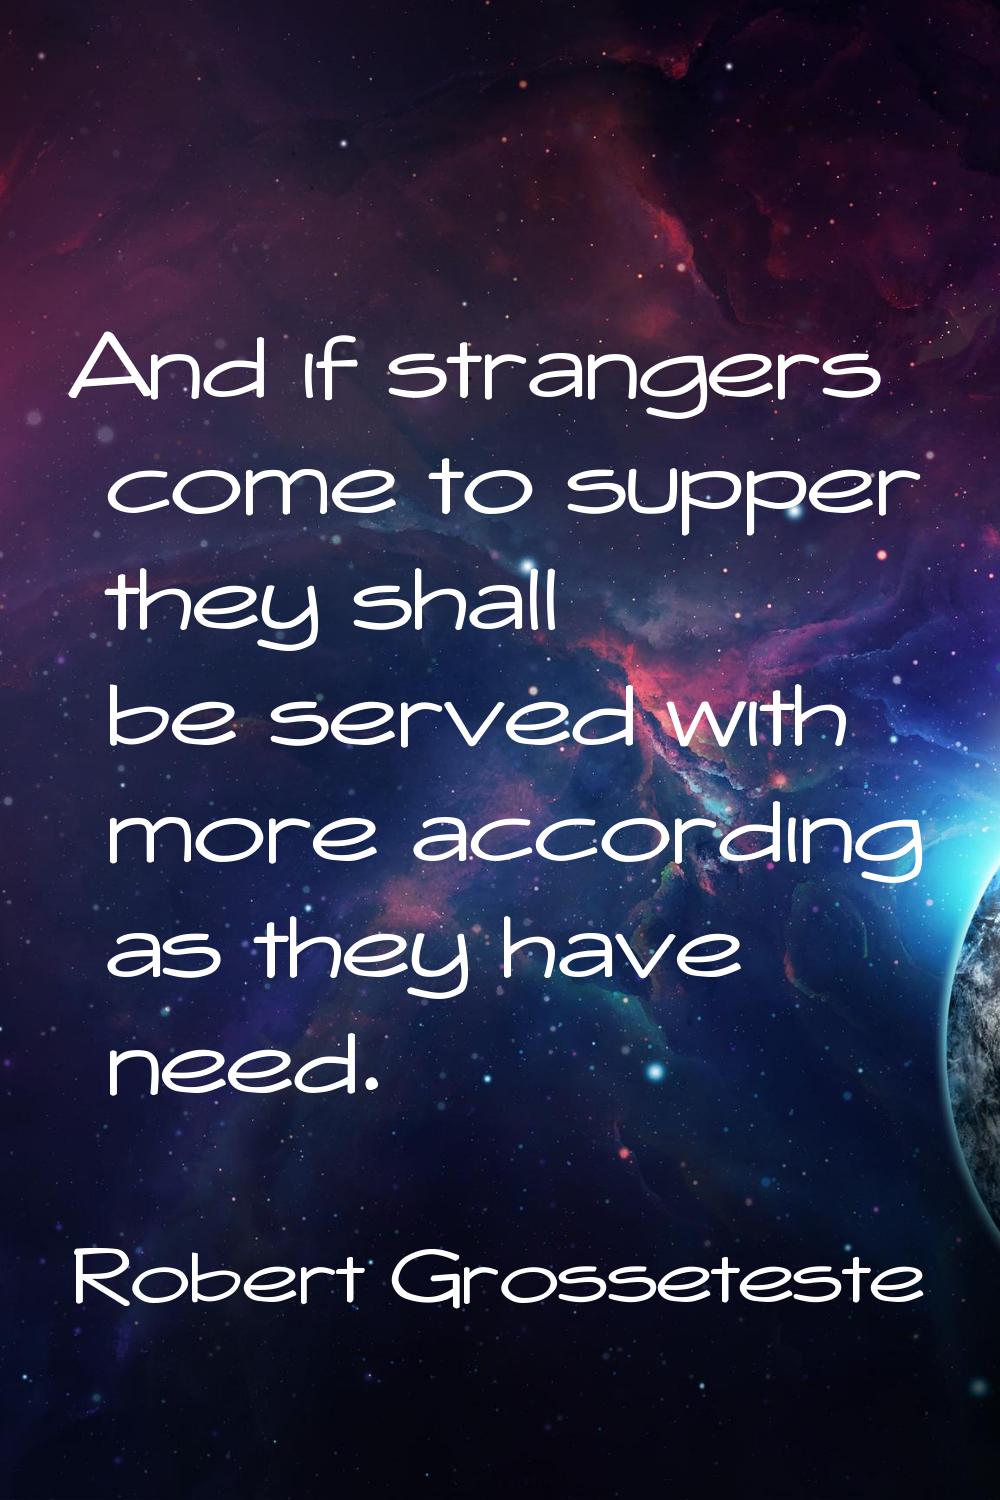 And if strangers come to supper they shall be served with more according as they have need.